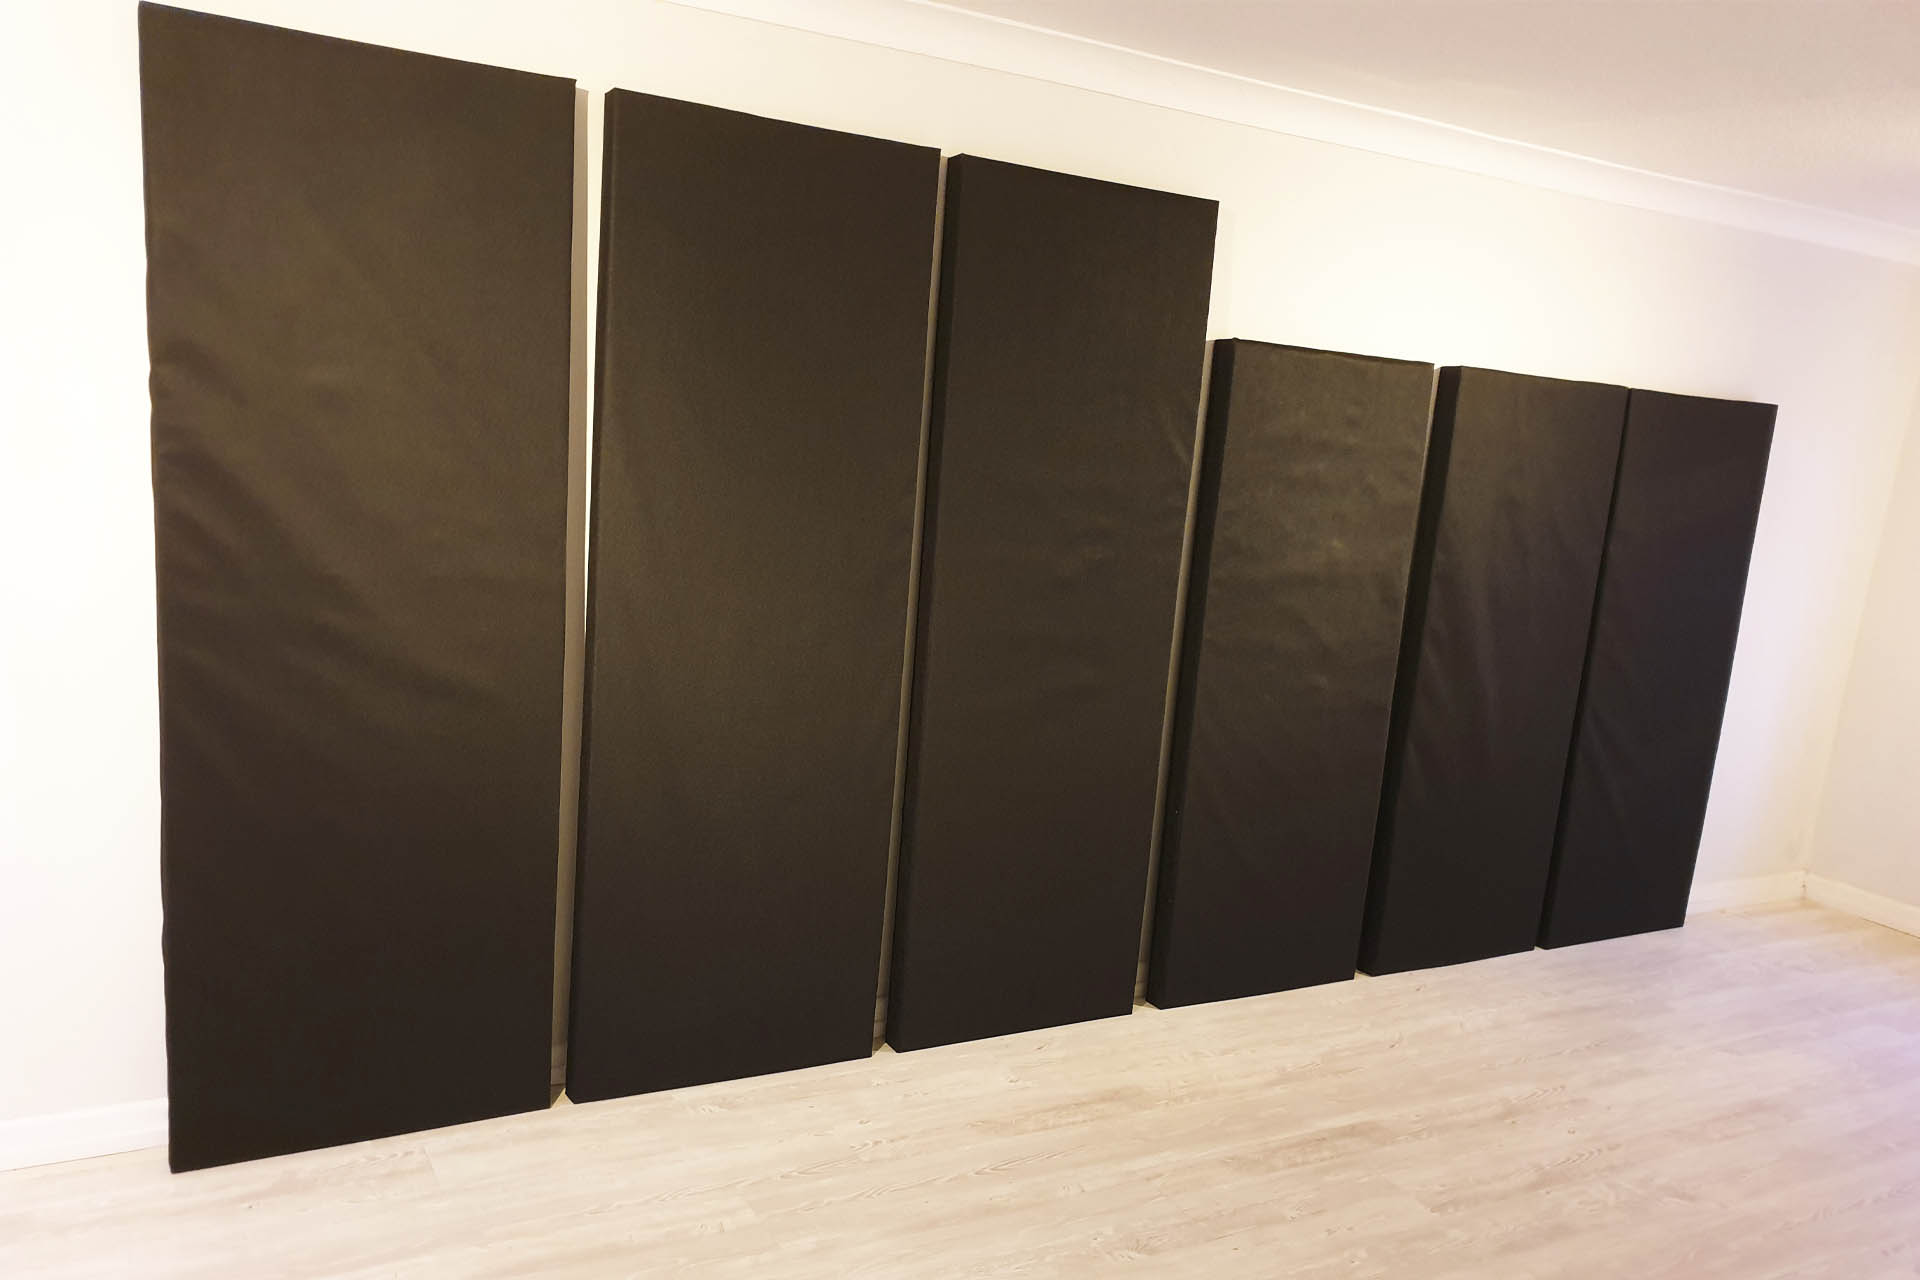 All six DIY acoustic panels now covered with weed membrane